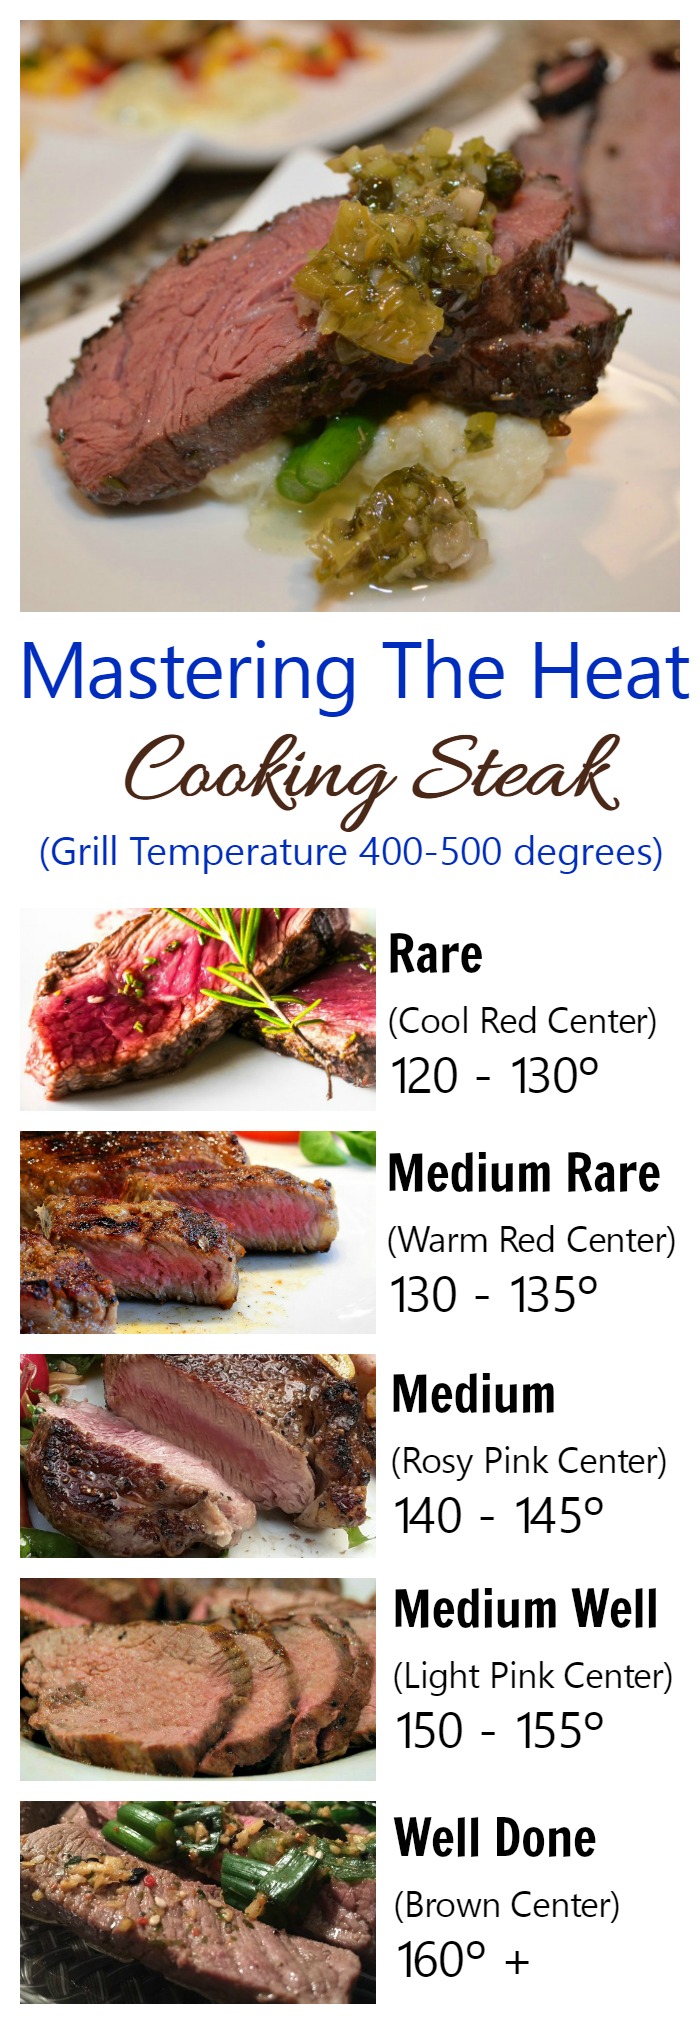 Steak Doneness is judged by the color, internal temperature, and juiciness of the meat. Do you know how to cook your steak to the prefect degree of doneness?